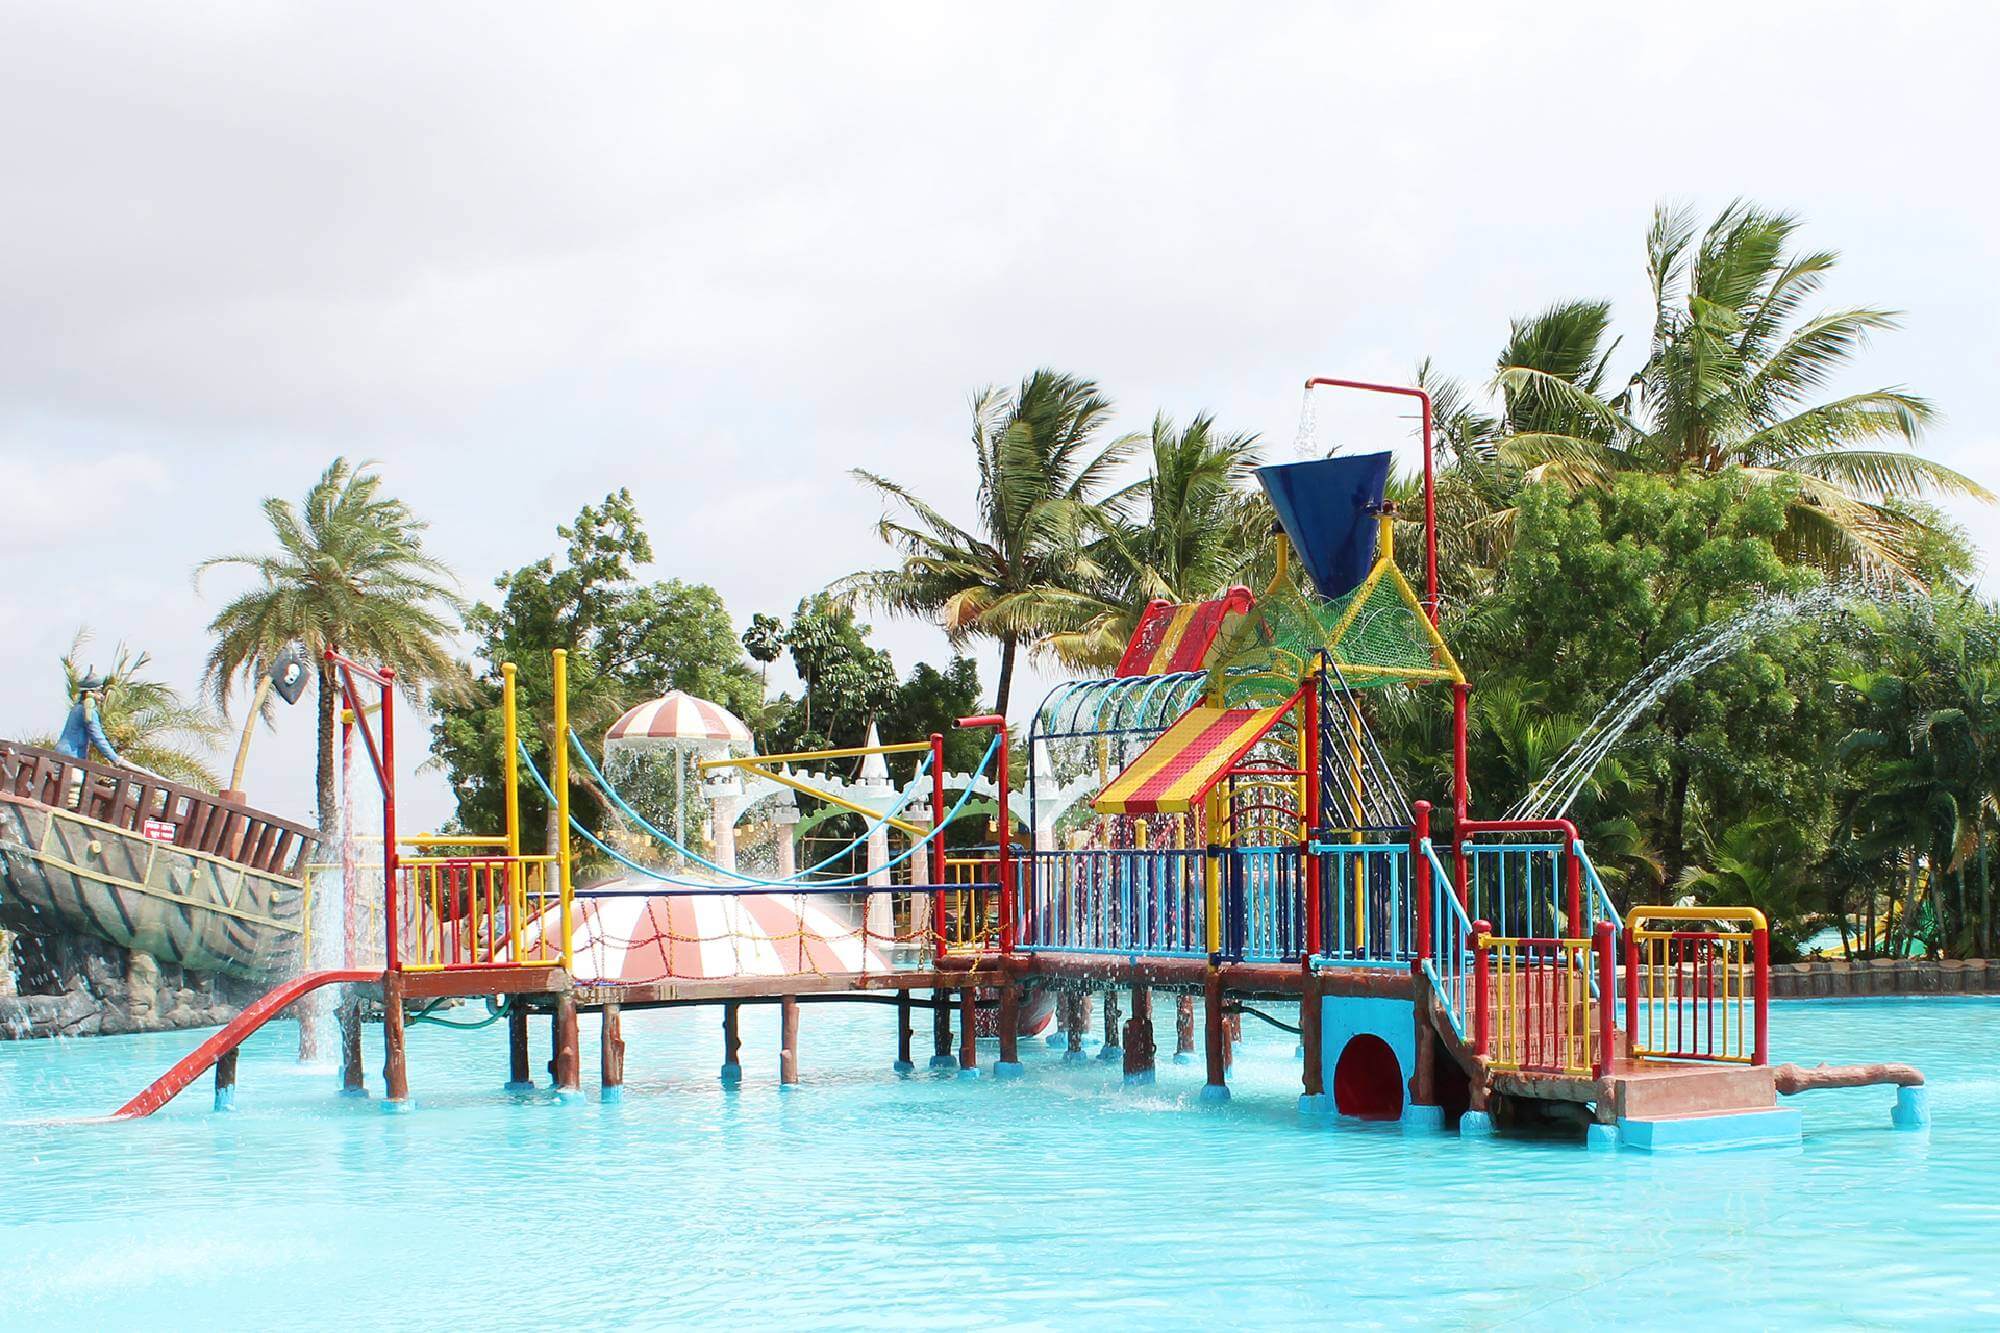 Diamond Water Park Pune Ticket Price Rates, Timings, Address Map Location, Contact Number, Reviews				    	    	    	    	    	    	    	    	    	    	4.33/5							(3)						